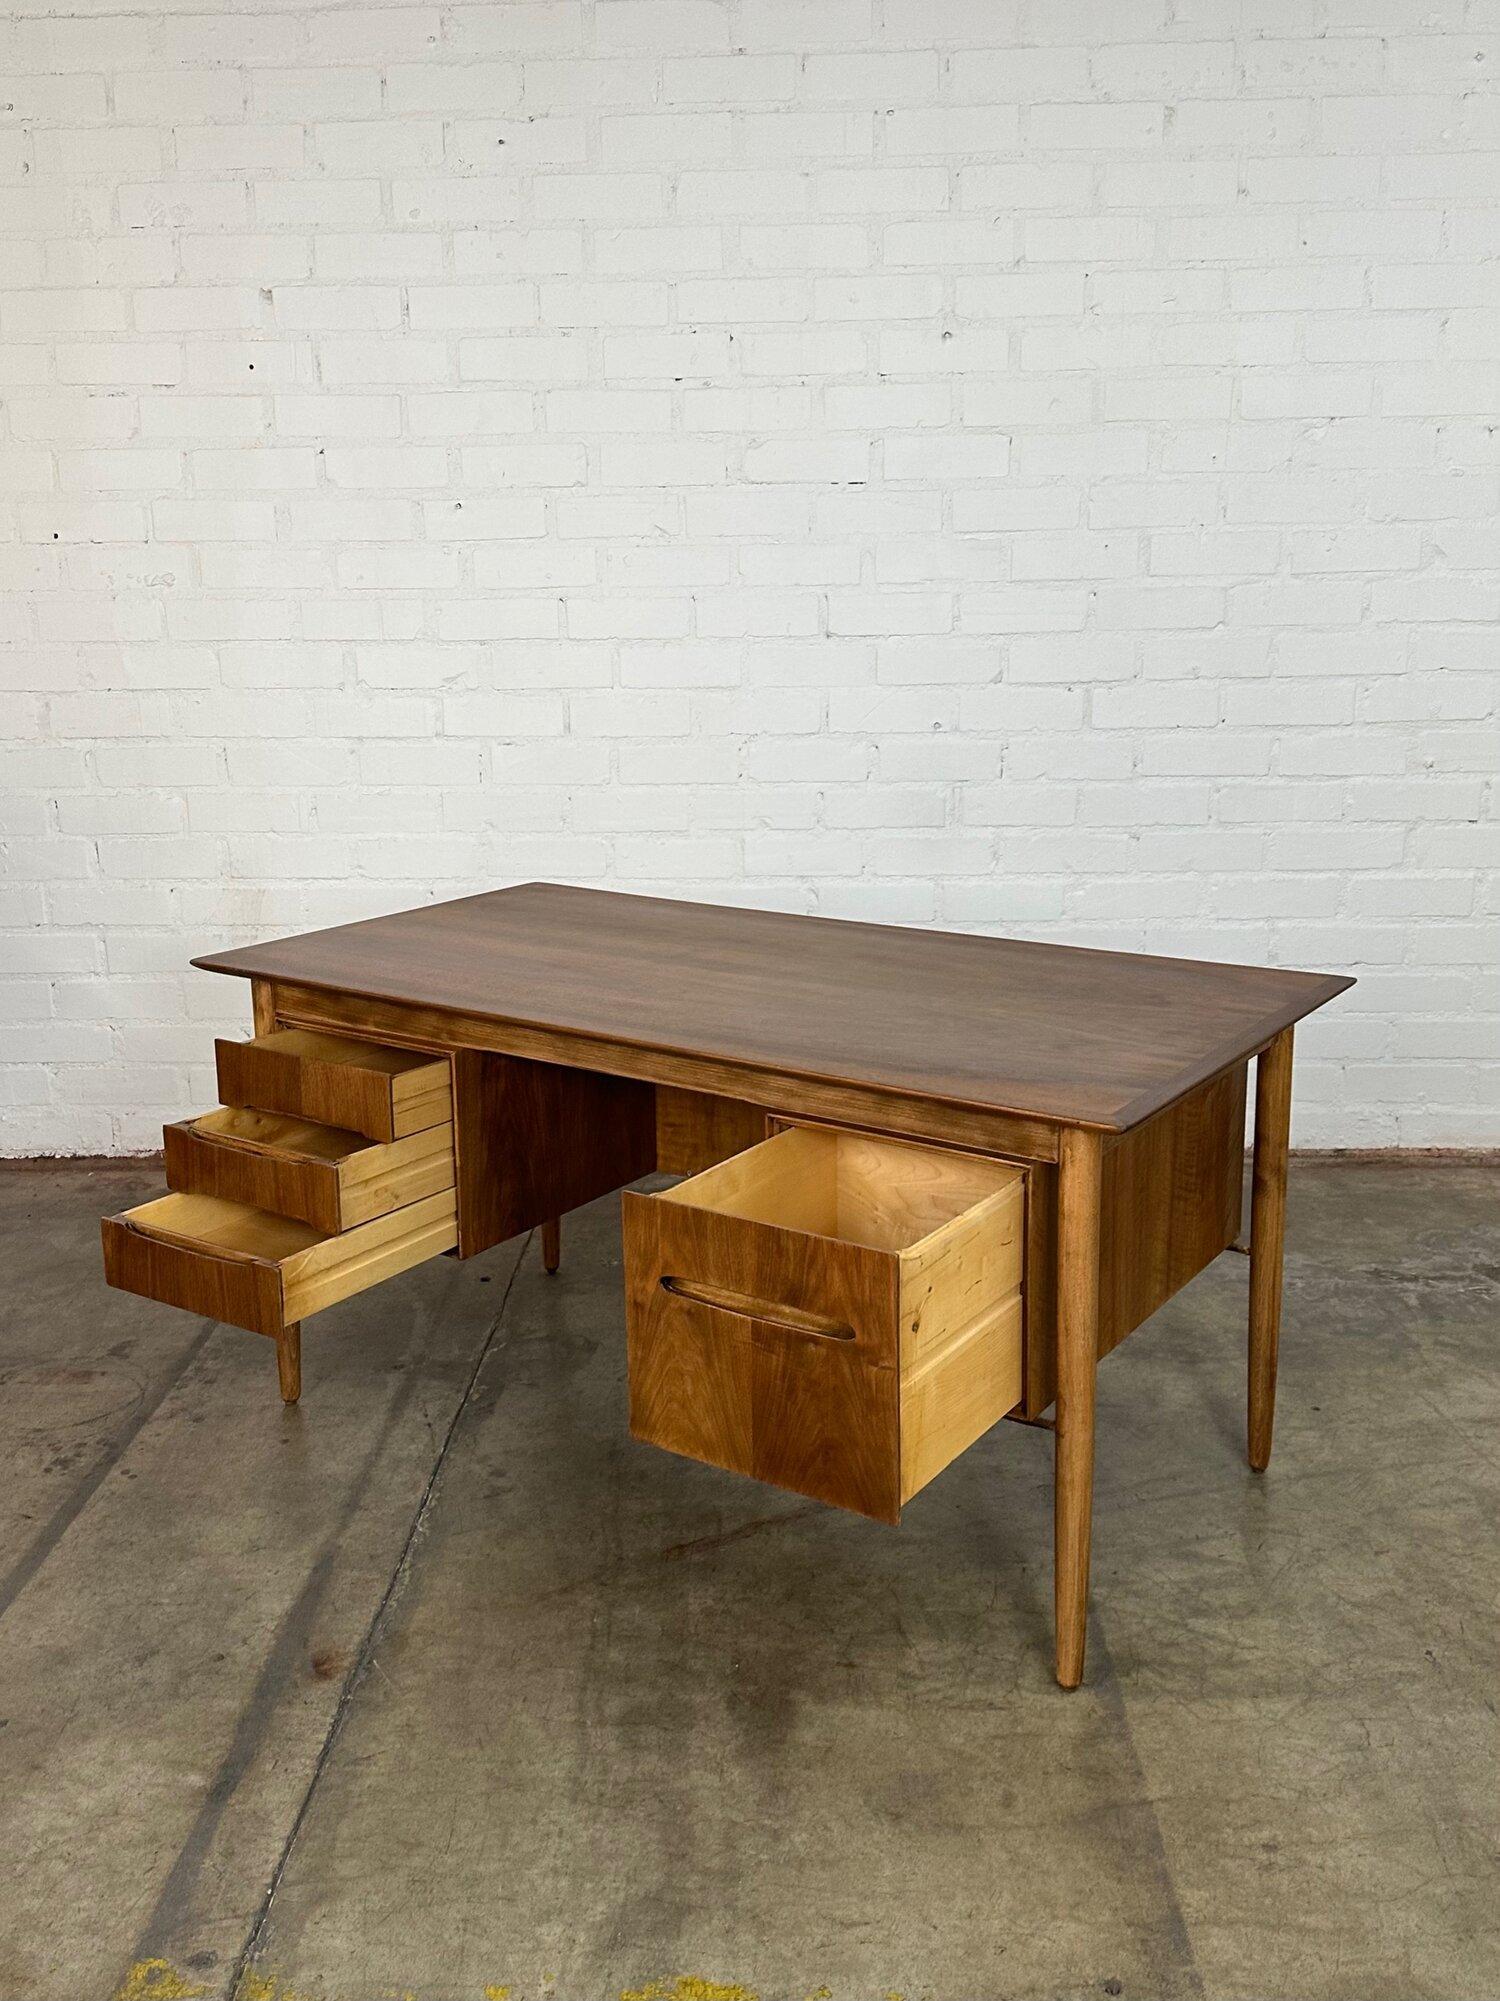 W59 D32 H29 KC26

Fully restored desk in a clear coat showcasing natural wood hues and natural grain. Desk is structurally sound and fully functional. Shows no major areas of wear.